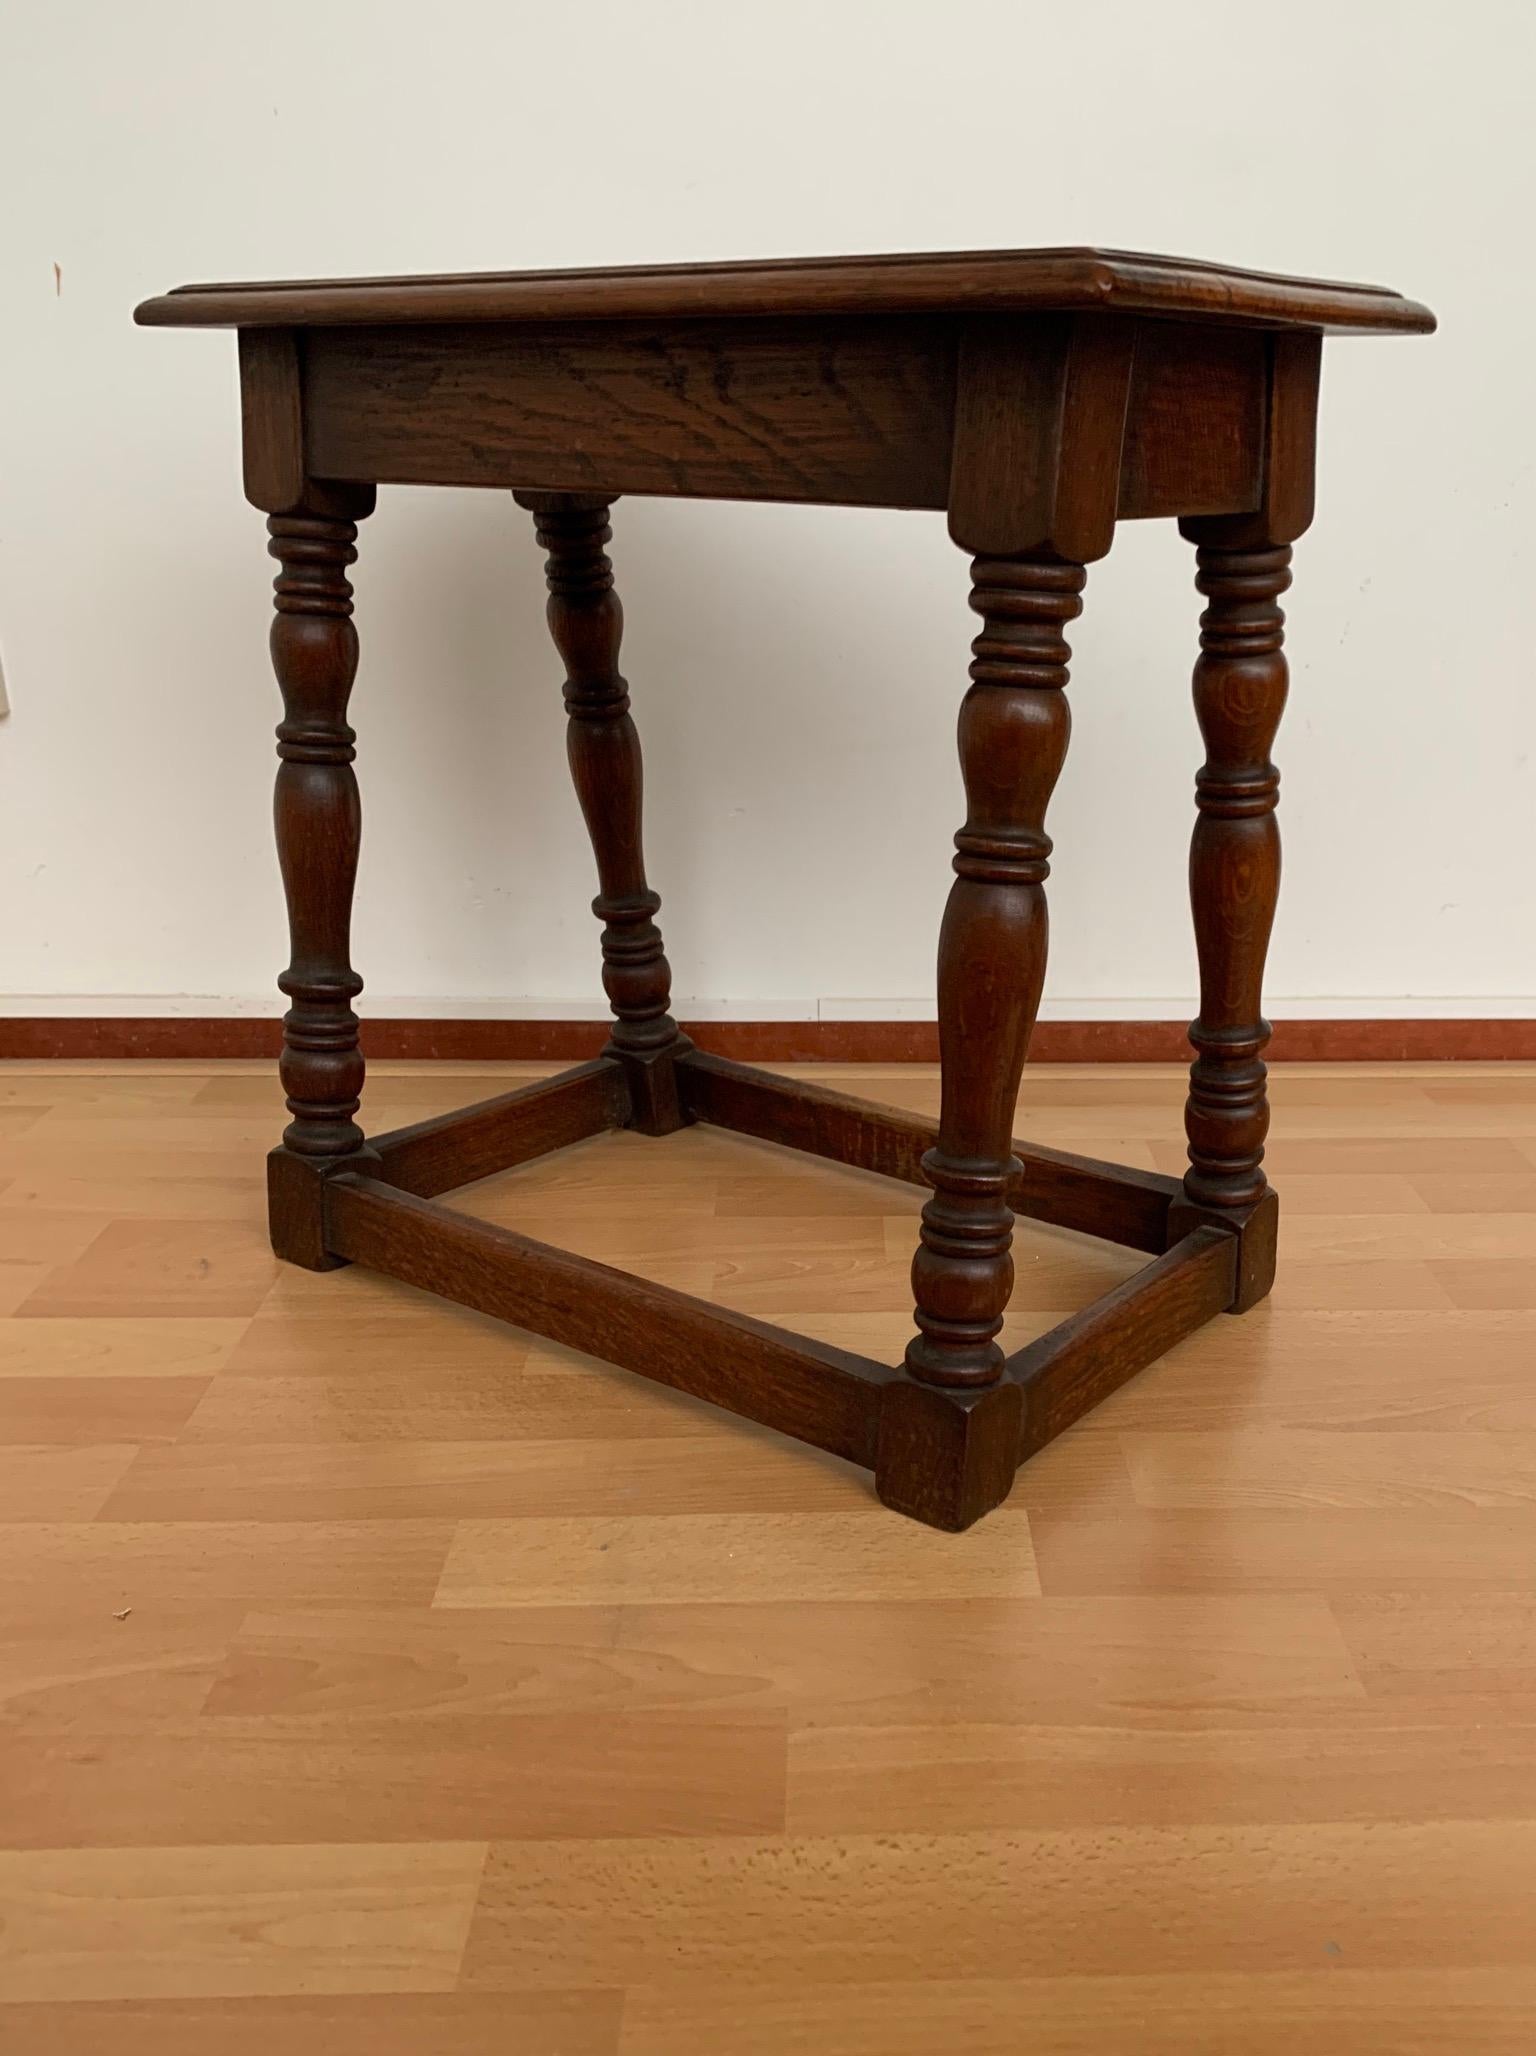 Solid oak joint stool, great shape and beautiful color.

This handcrafted joint stool seat is both rustic and stylish. It is an absolute joy to watch and to sit on. It is as stabile as the day it was handcrafted. In our longing for reliable and